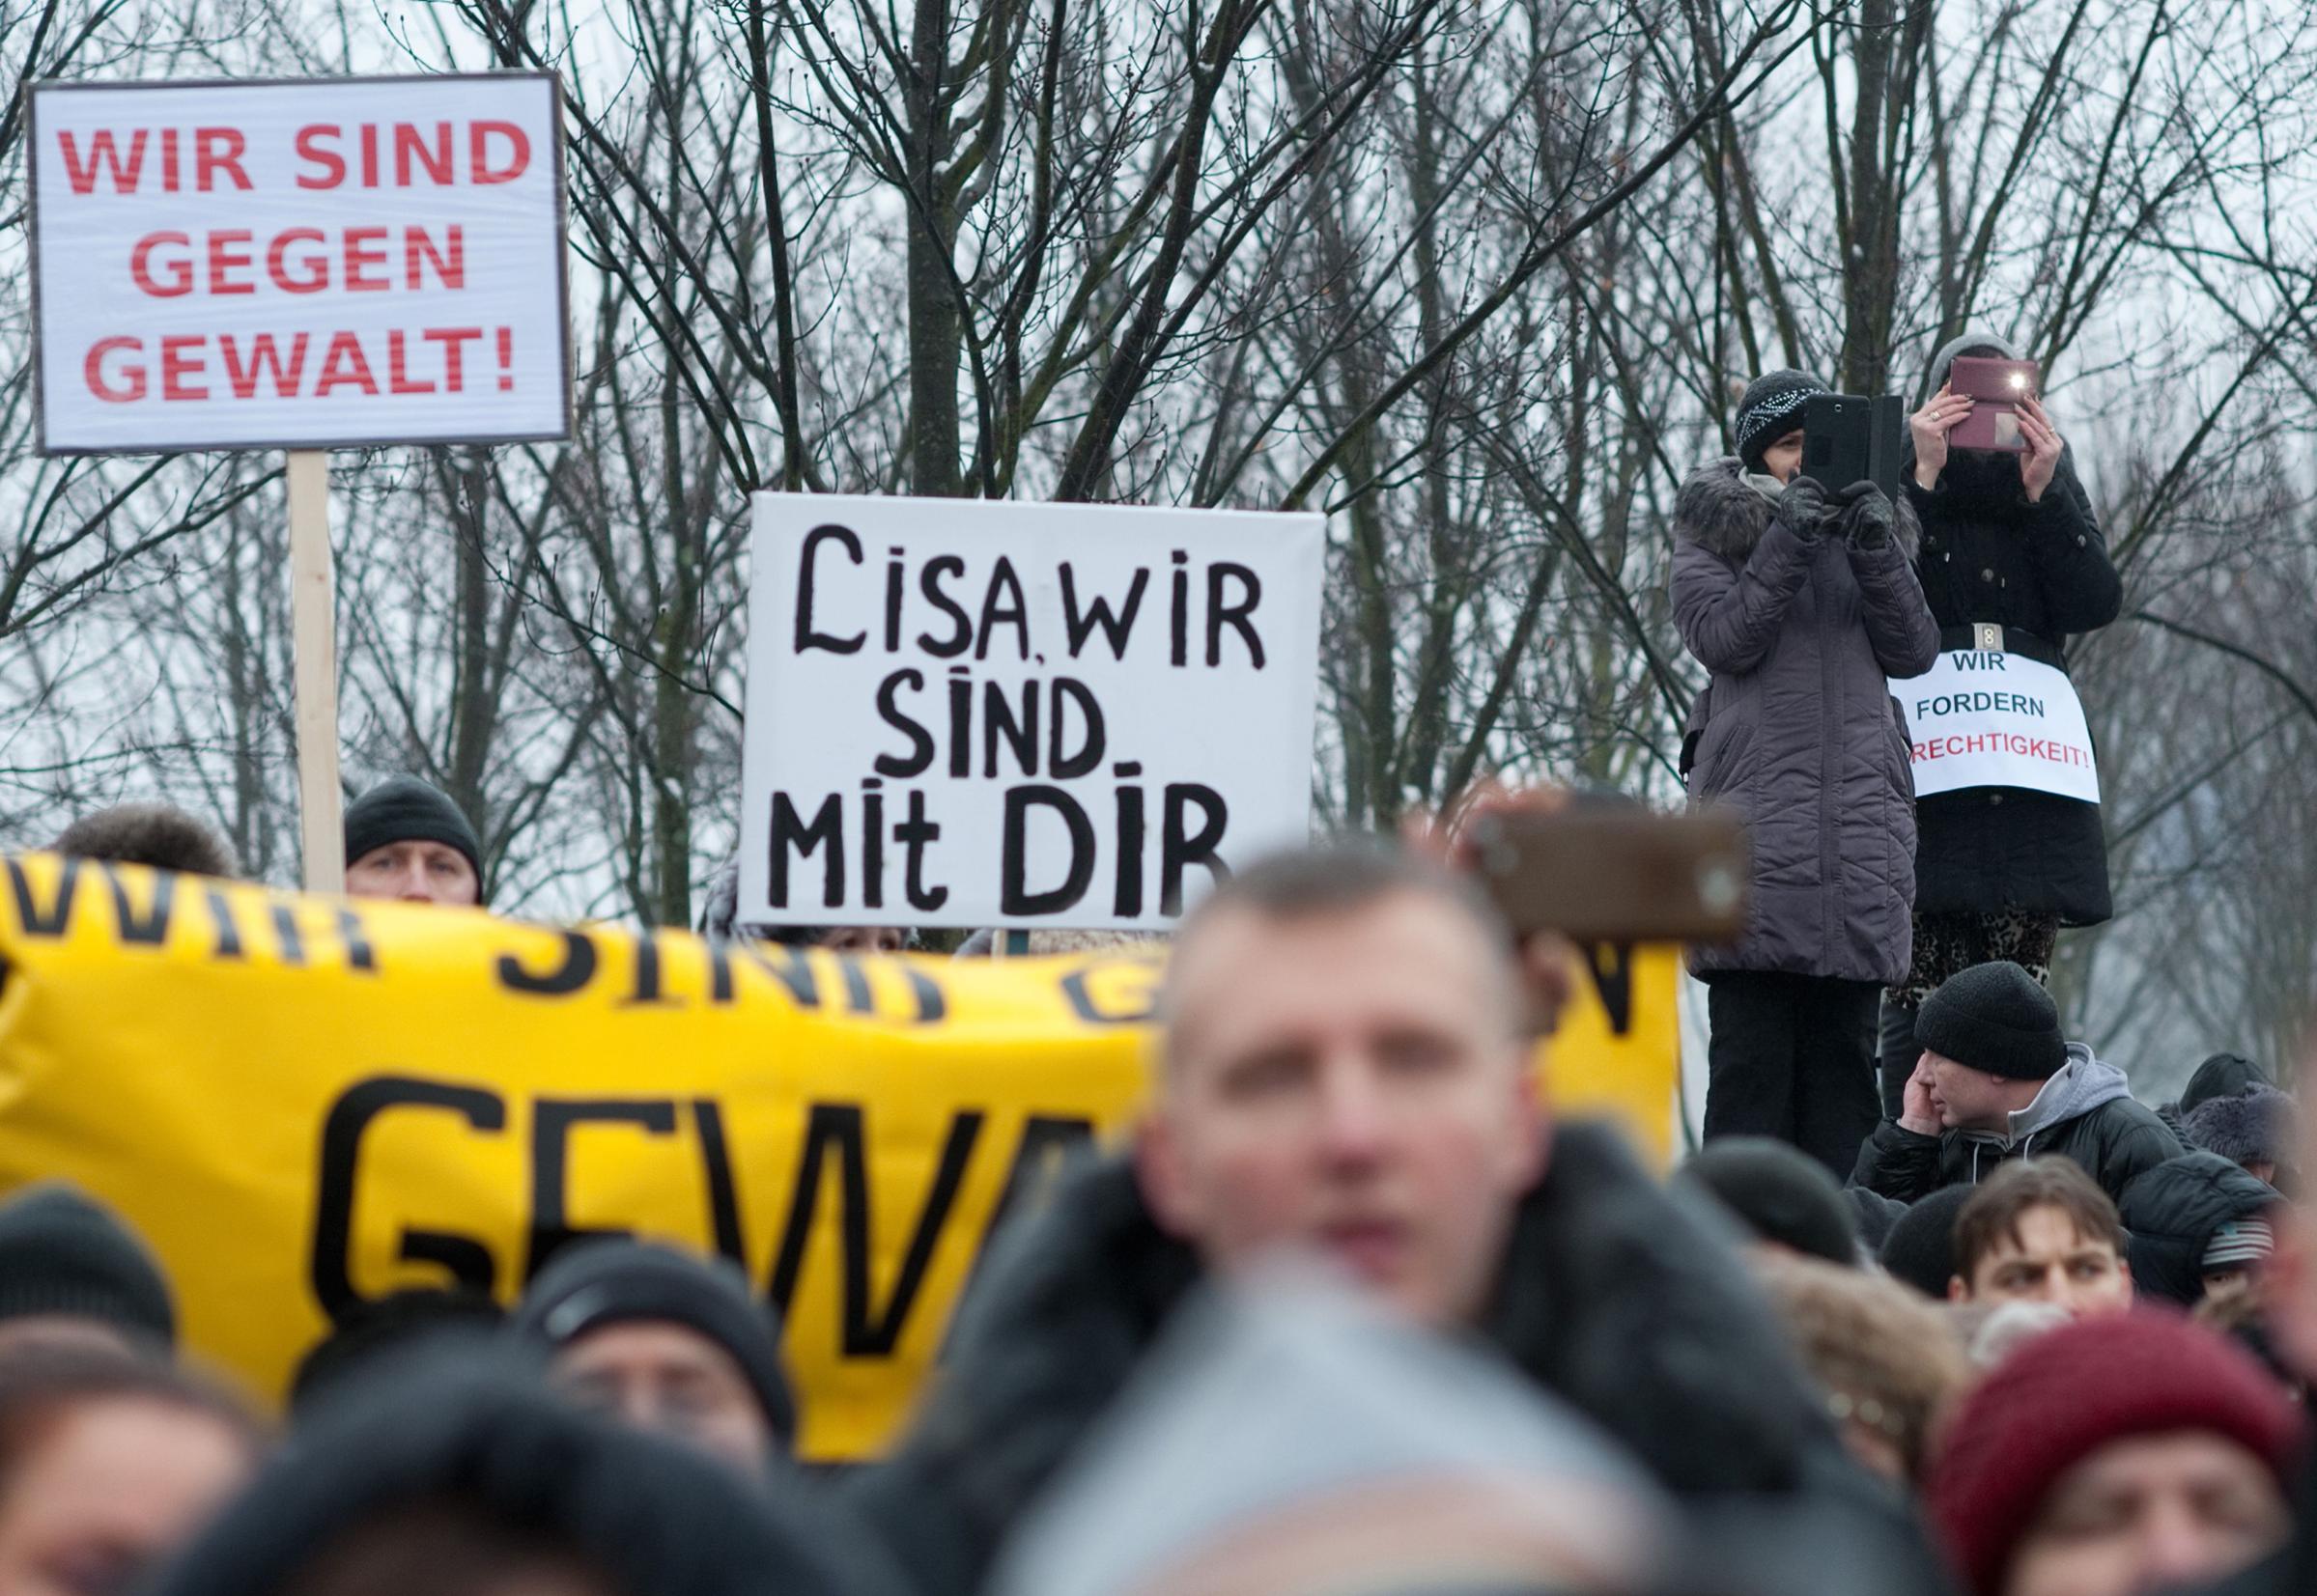 Protesters hold up a sign reading "Lisa, we are with you" as they demonstrate in front of the chancellery after Russian media spread a story -- quickly debunked by German police -- of three Muslim men who raped a 13-year-old Russian-German girl, in Berlin on Jan. 23, 2016.